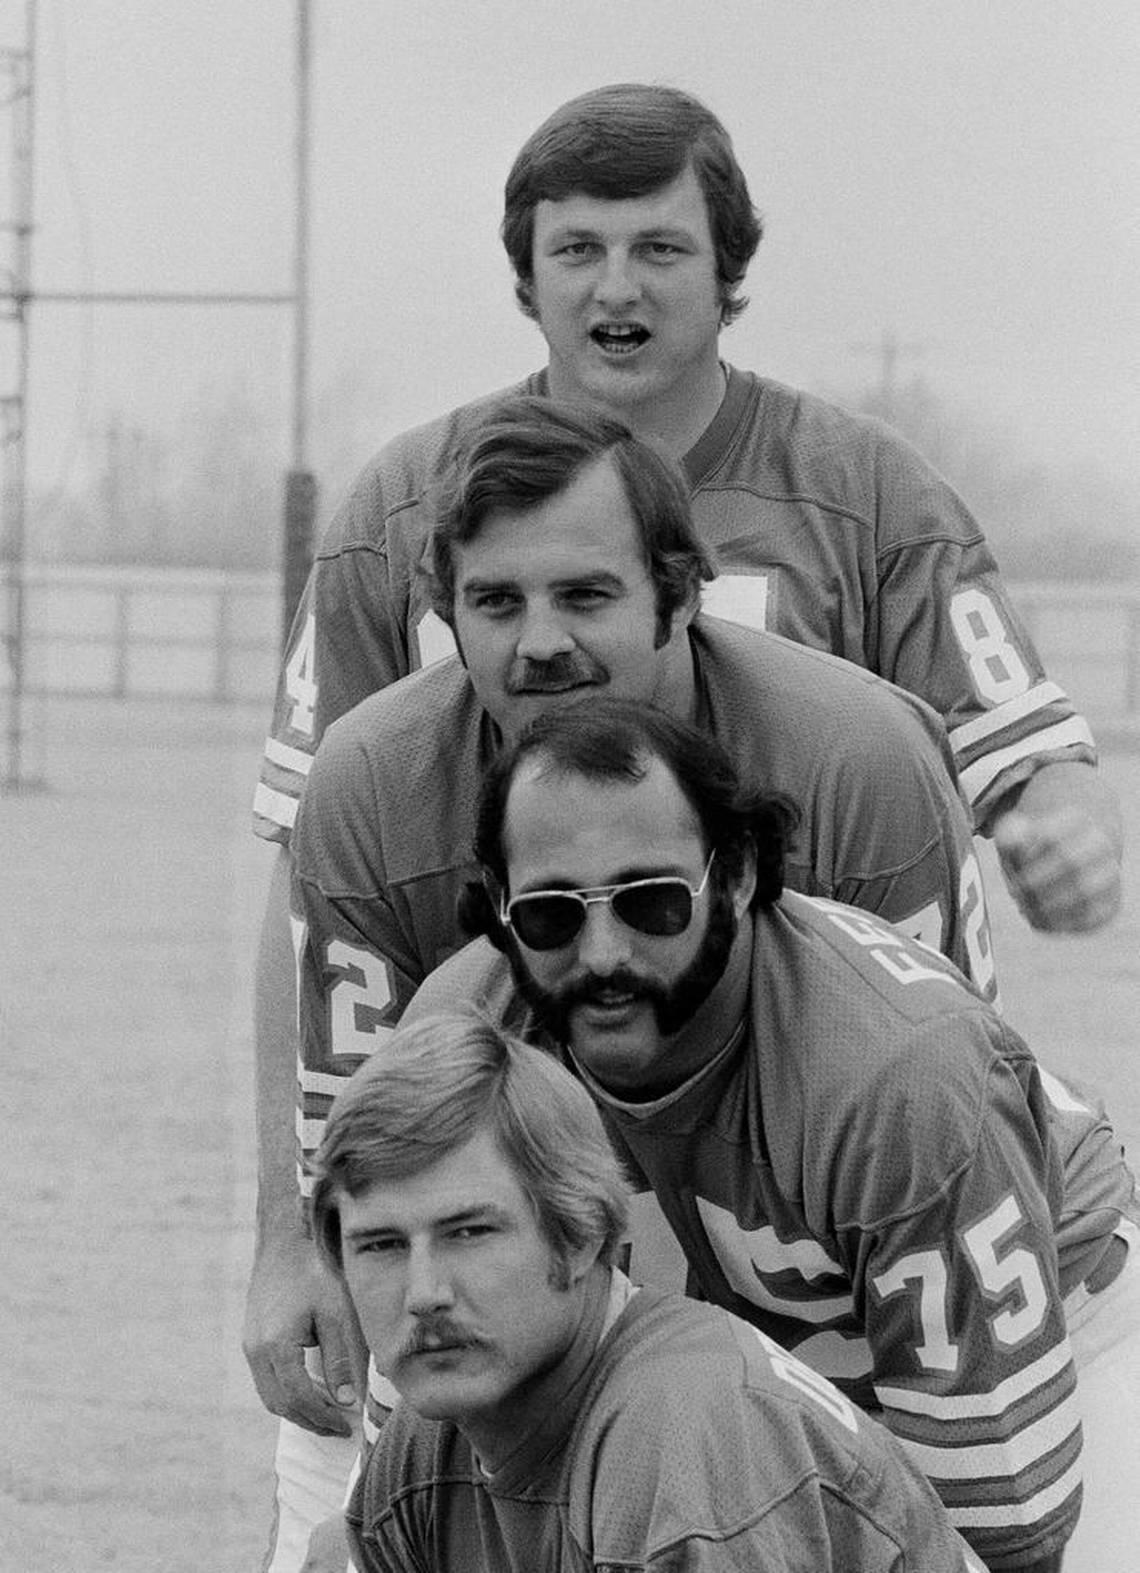 In this Jan. 7, 1974, photo, Dolphins defensive linemen, from top to bottom, Bill Stanfill, Bob Heinz, Manny Fernandez and Vern Den Herder pose in Houston during the Dolphins picture day for Super Bowl VIII. Stanfill, the former Georgia and Dolphins star, died at age 69. The university issued a statement on behalf of Stanfill’s family saying he died Thursday night, Nov. 10, 2016, in Albany, Ga.